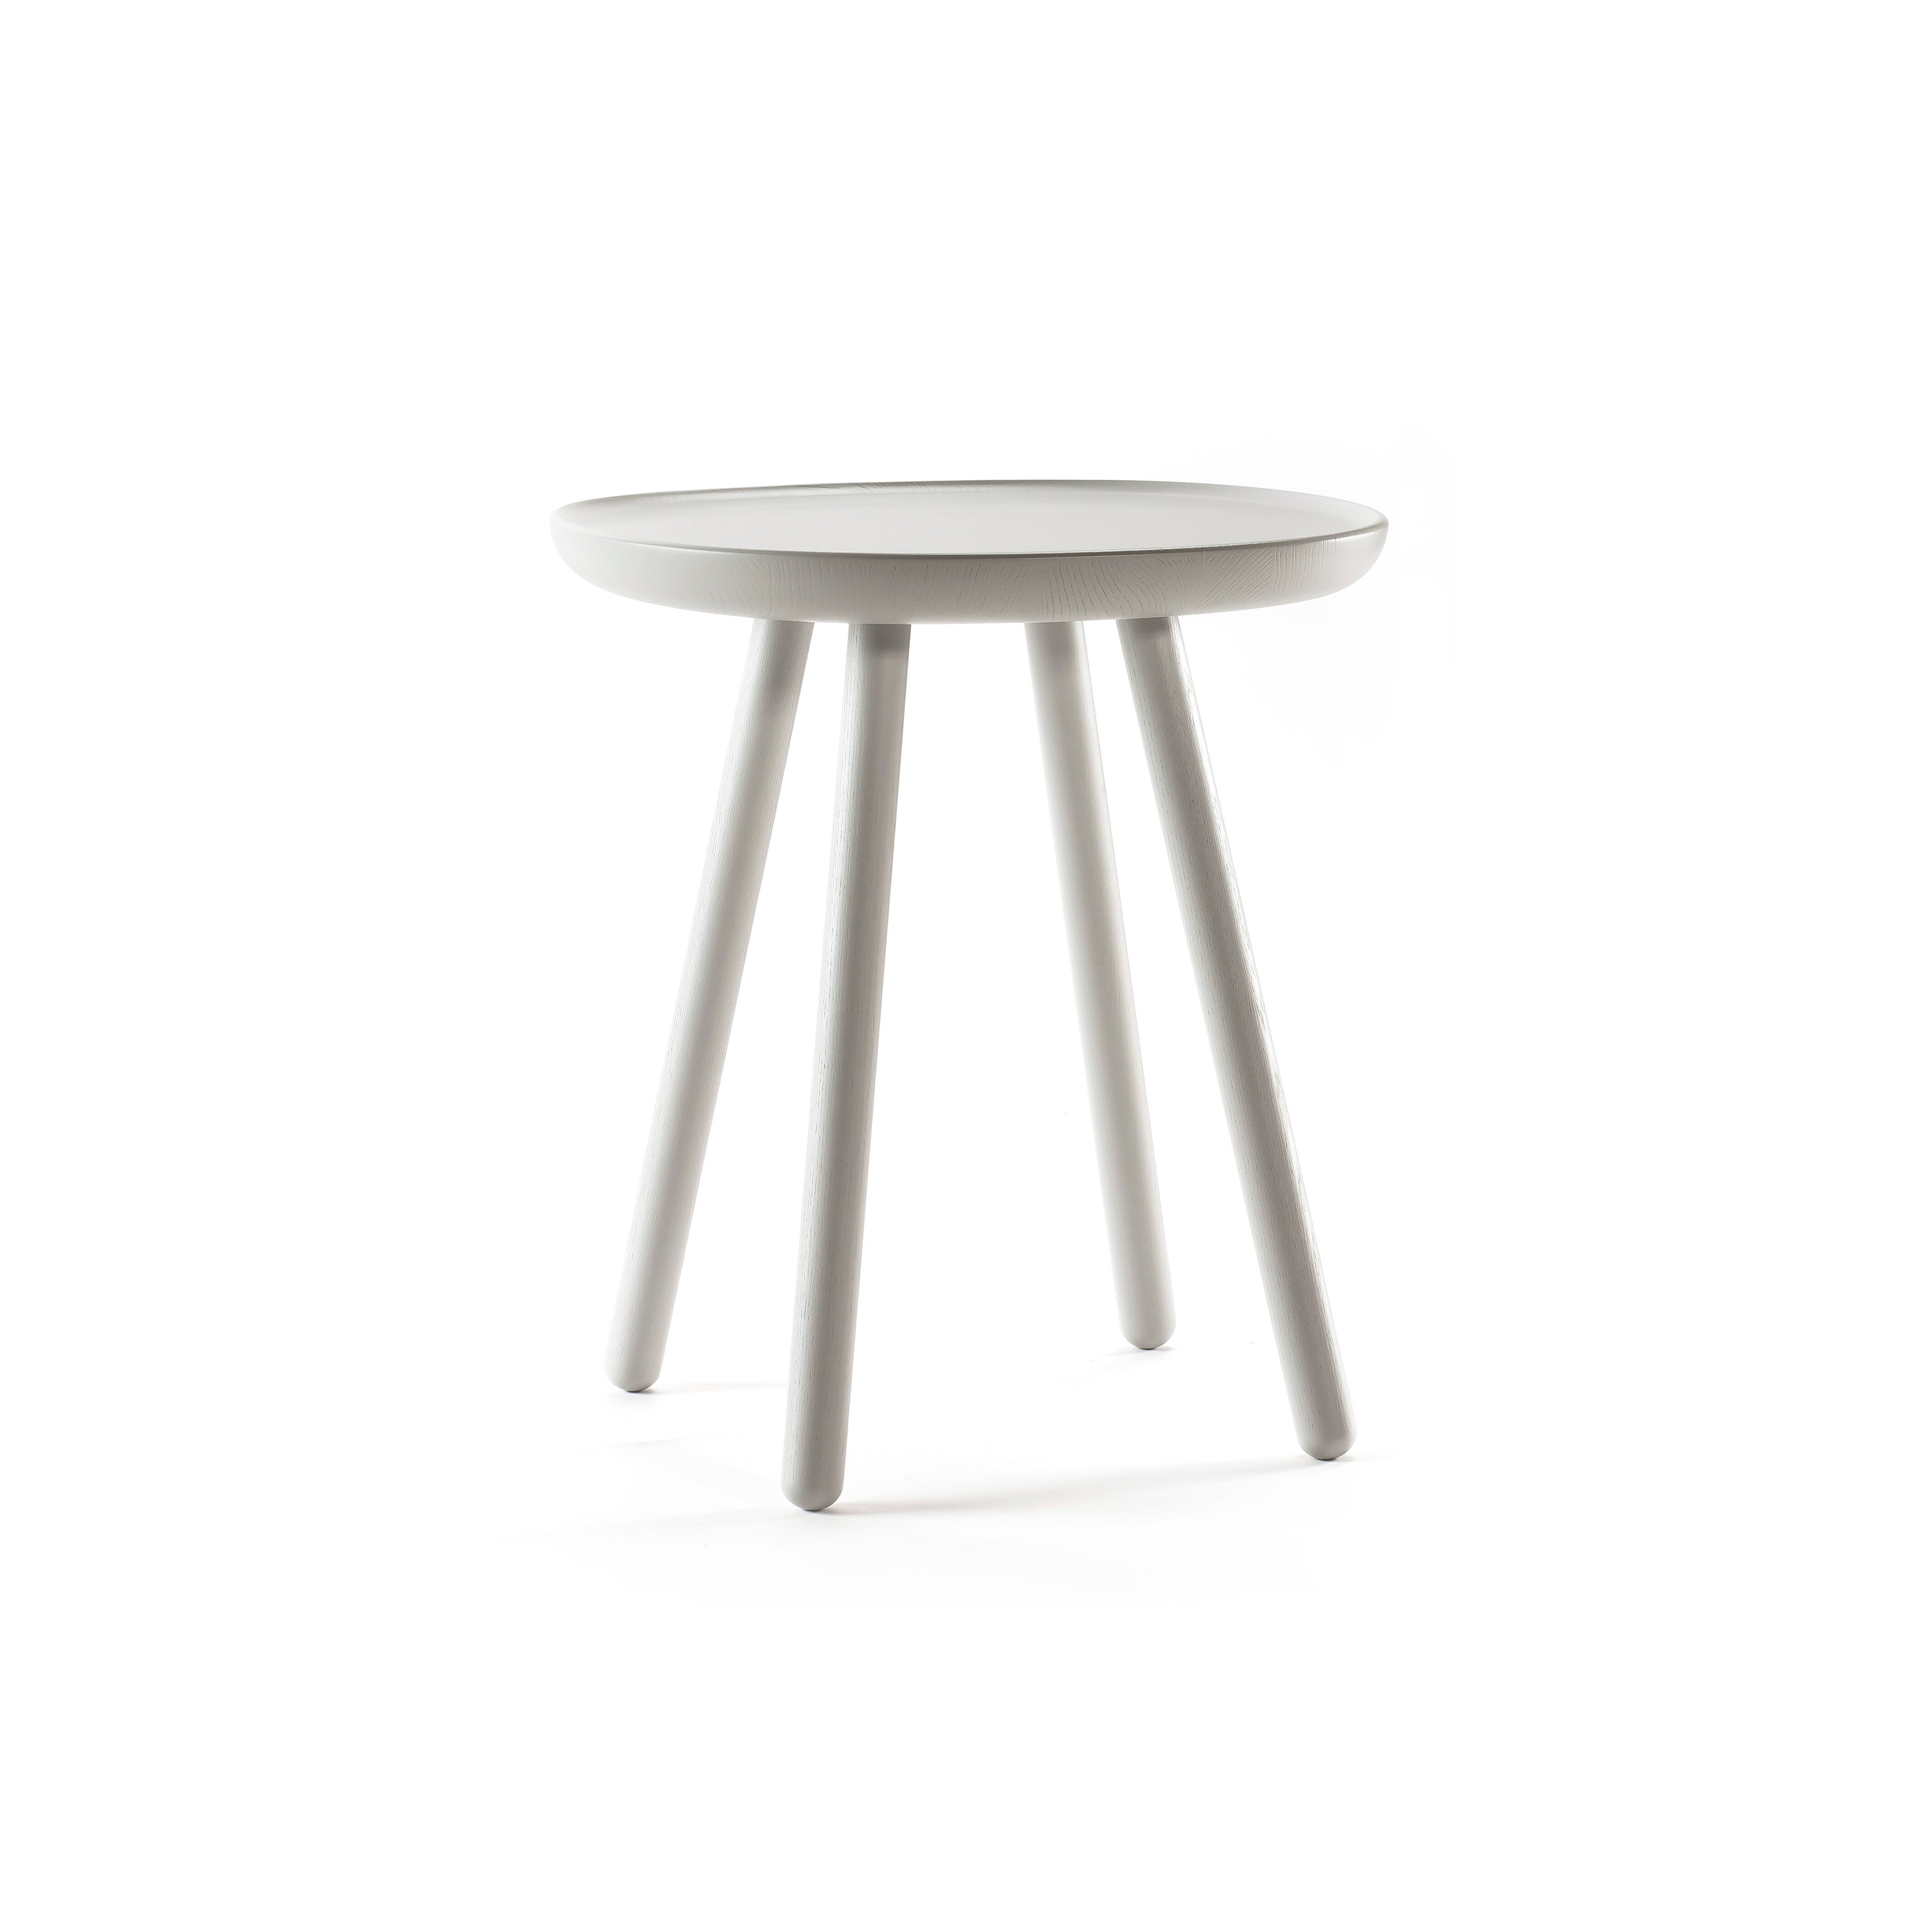 "TG Square Side Table 45cm, Grey "